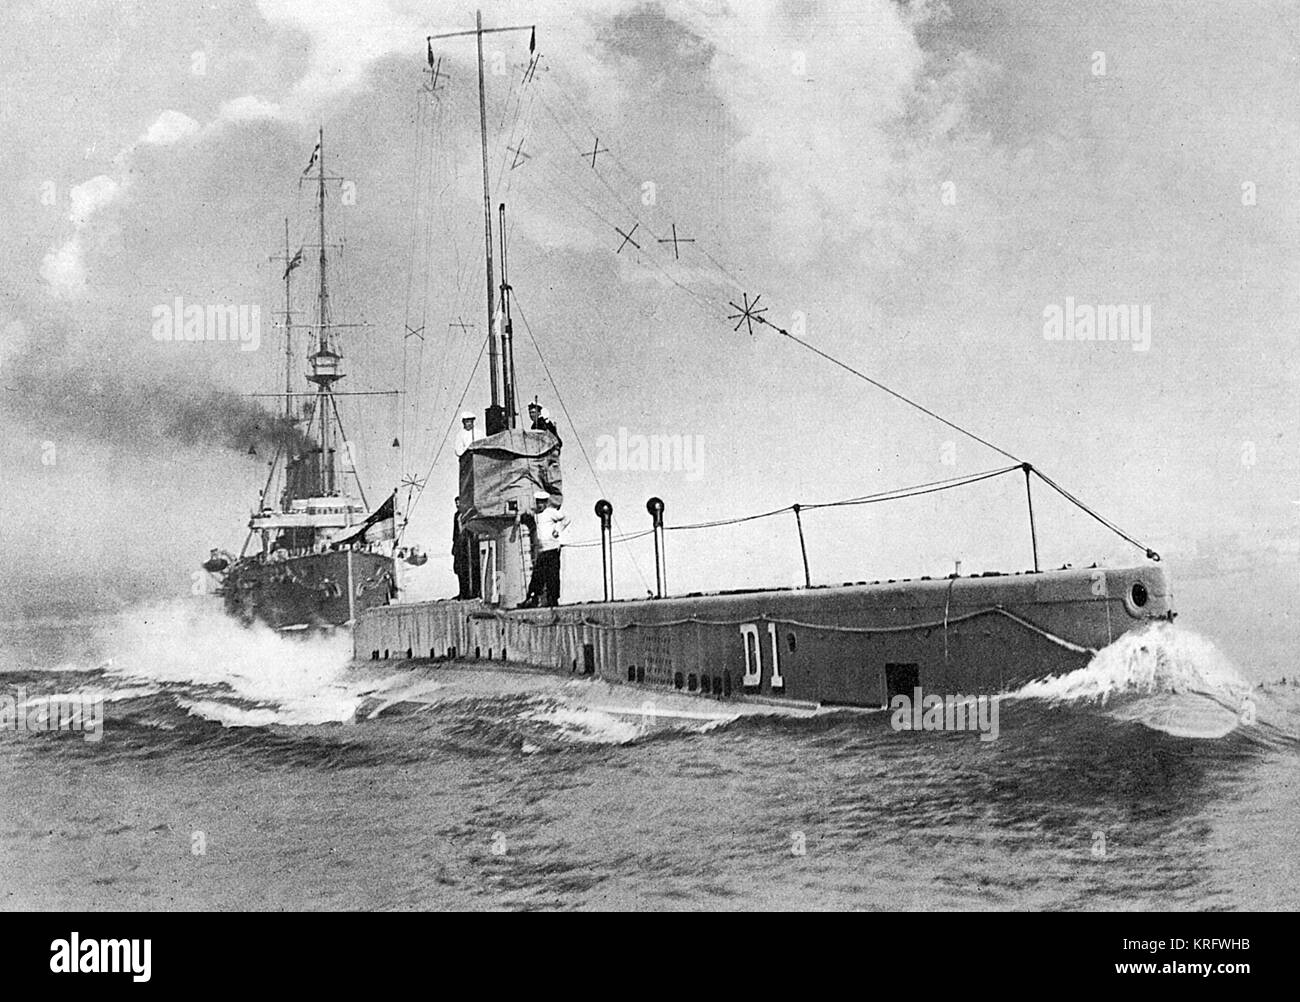 British submarine 'D 1' with H.M.S. 'Drake' following in her wake.  All the latest British submarines during the First World War period were fitted with wireless telegraphy.       Date: 1914 Stock Photo